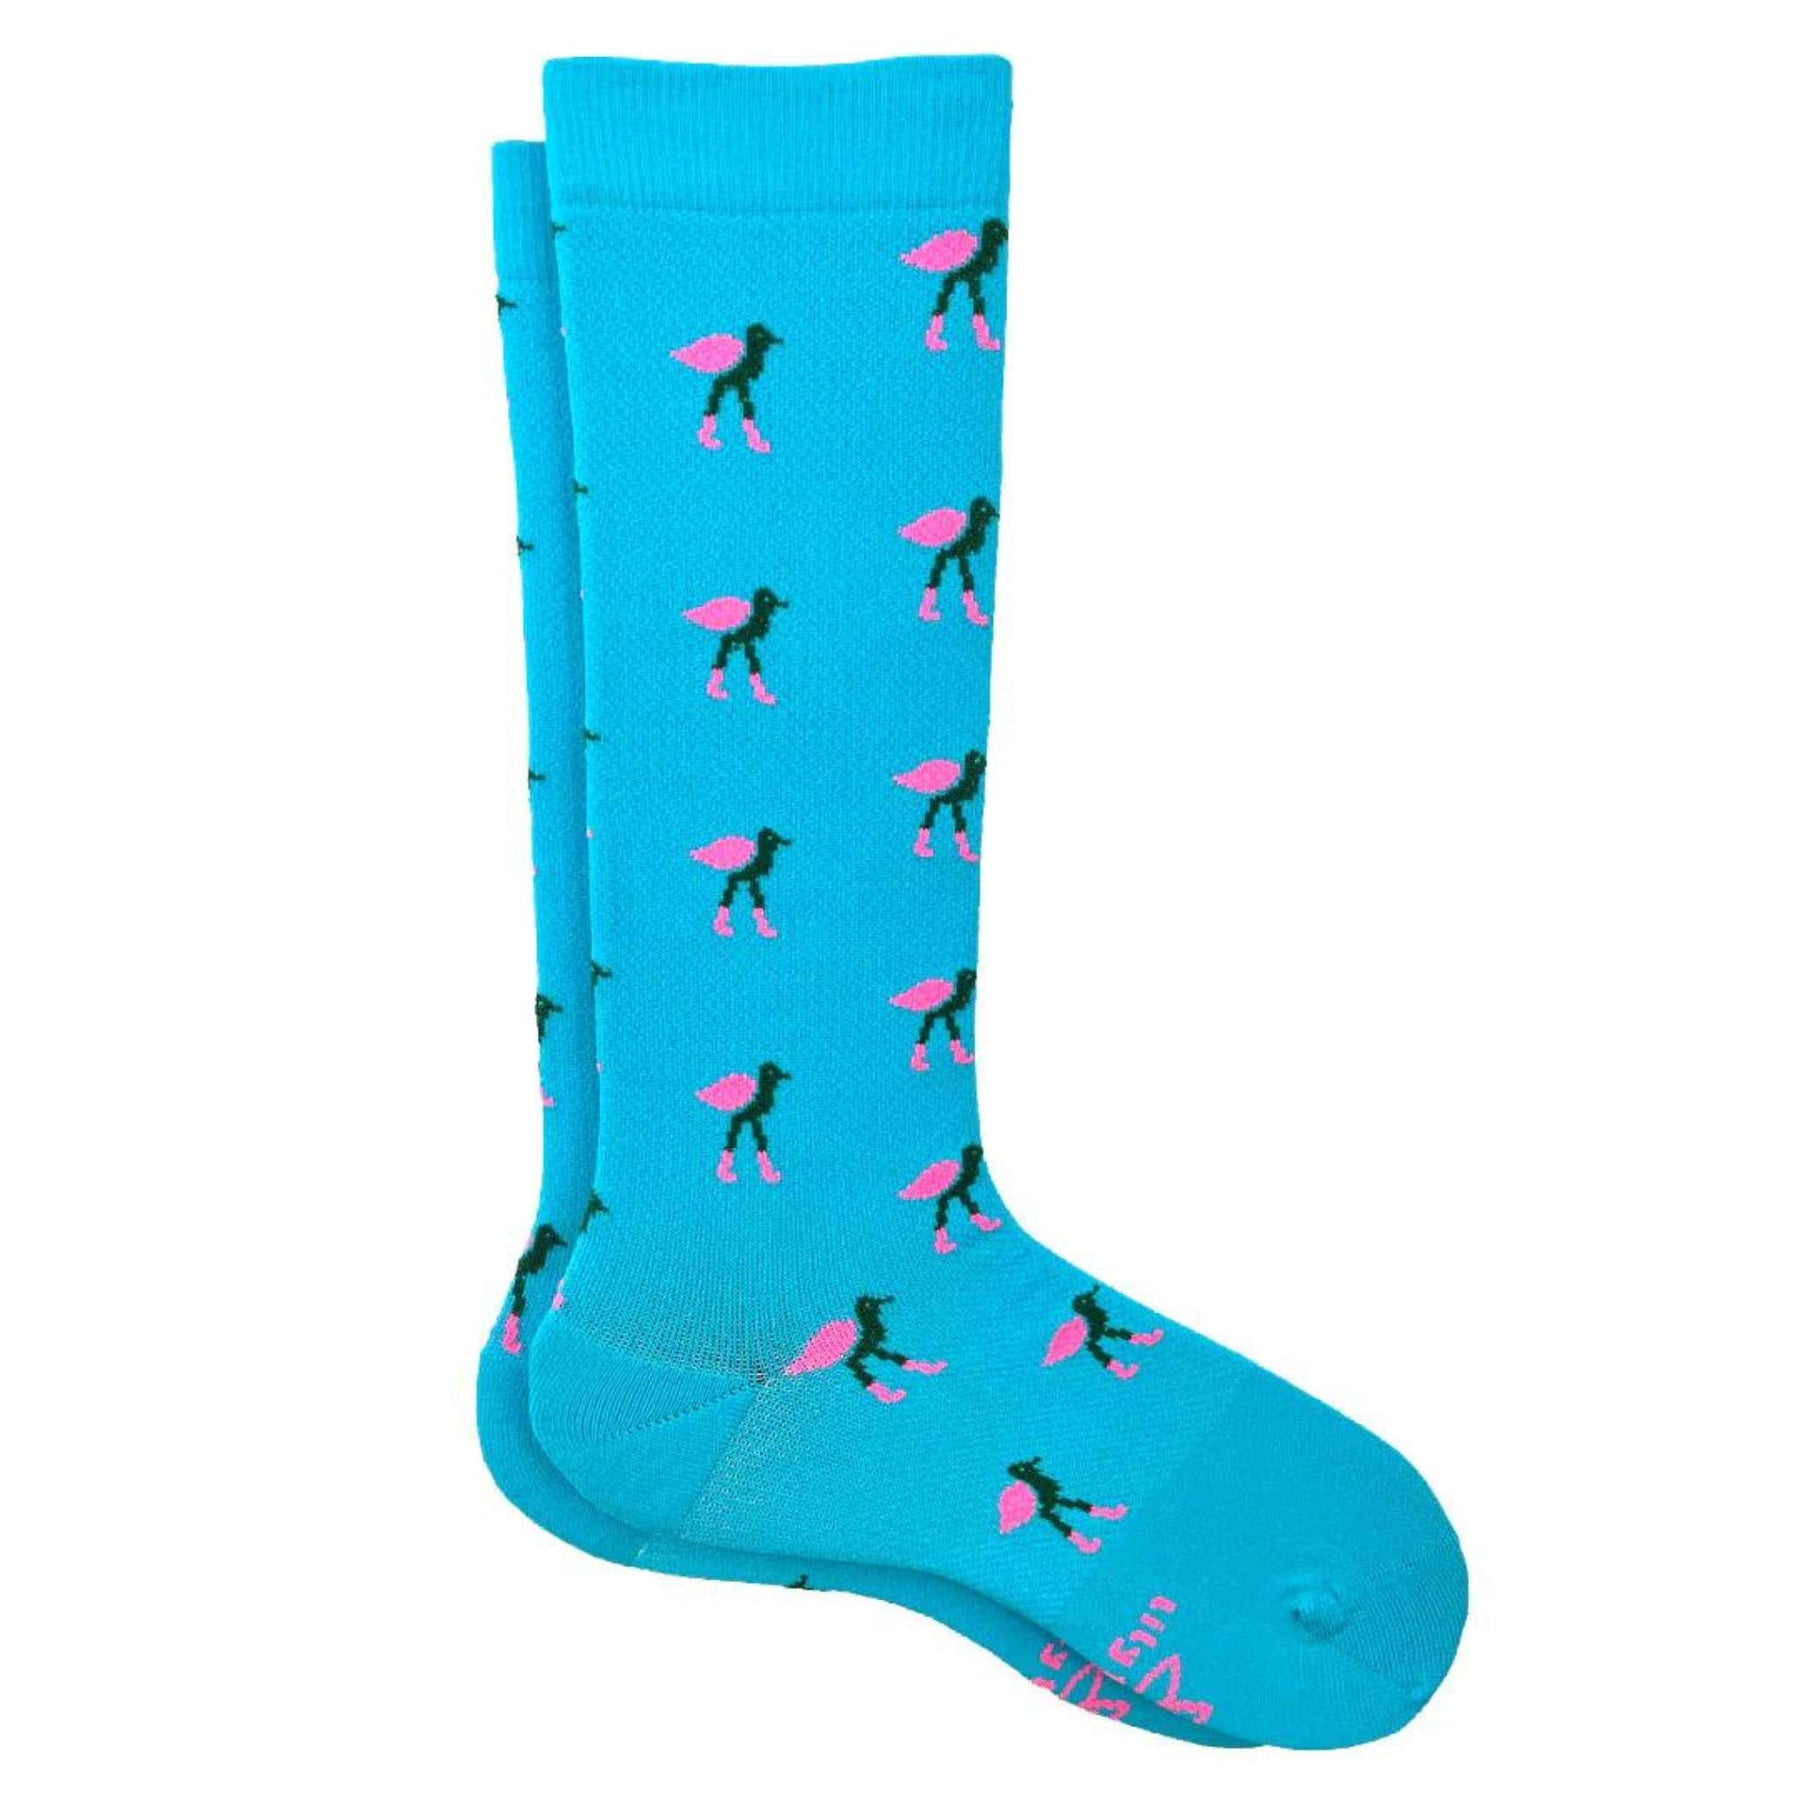 Compression socks in summer? Don't sweat it! – Lily Trotters